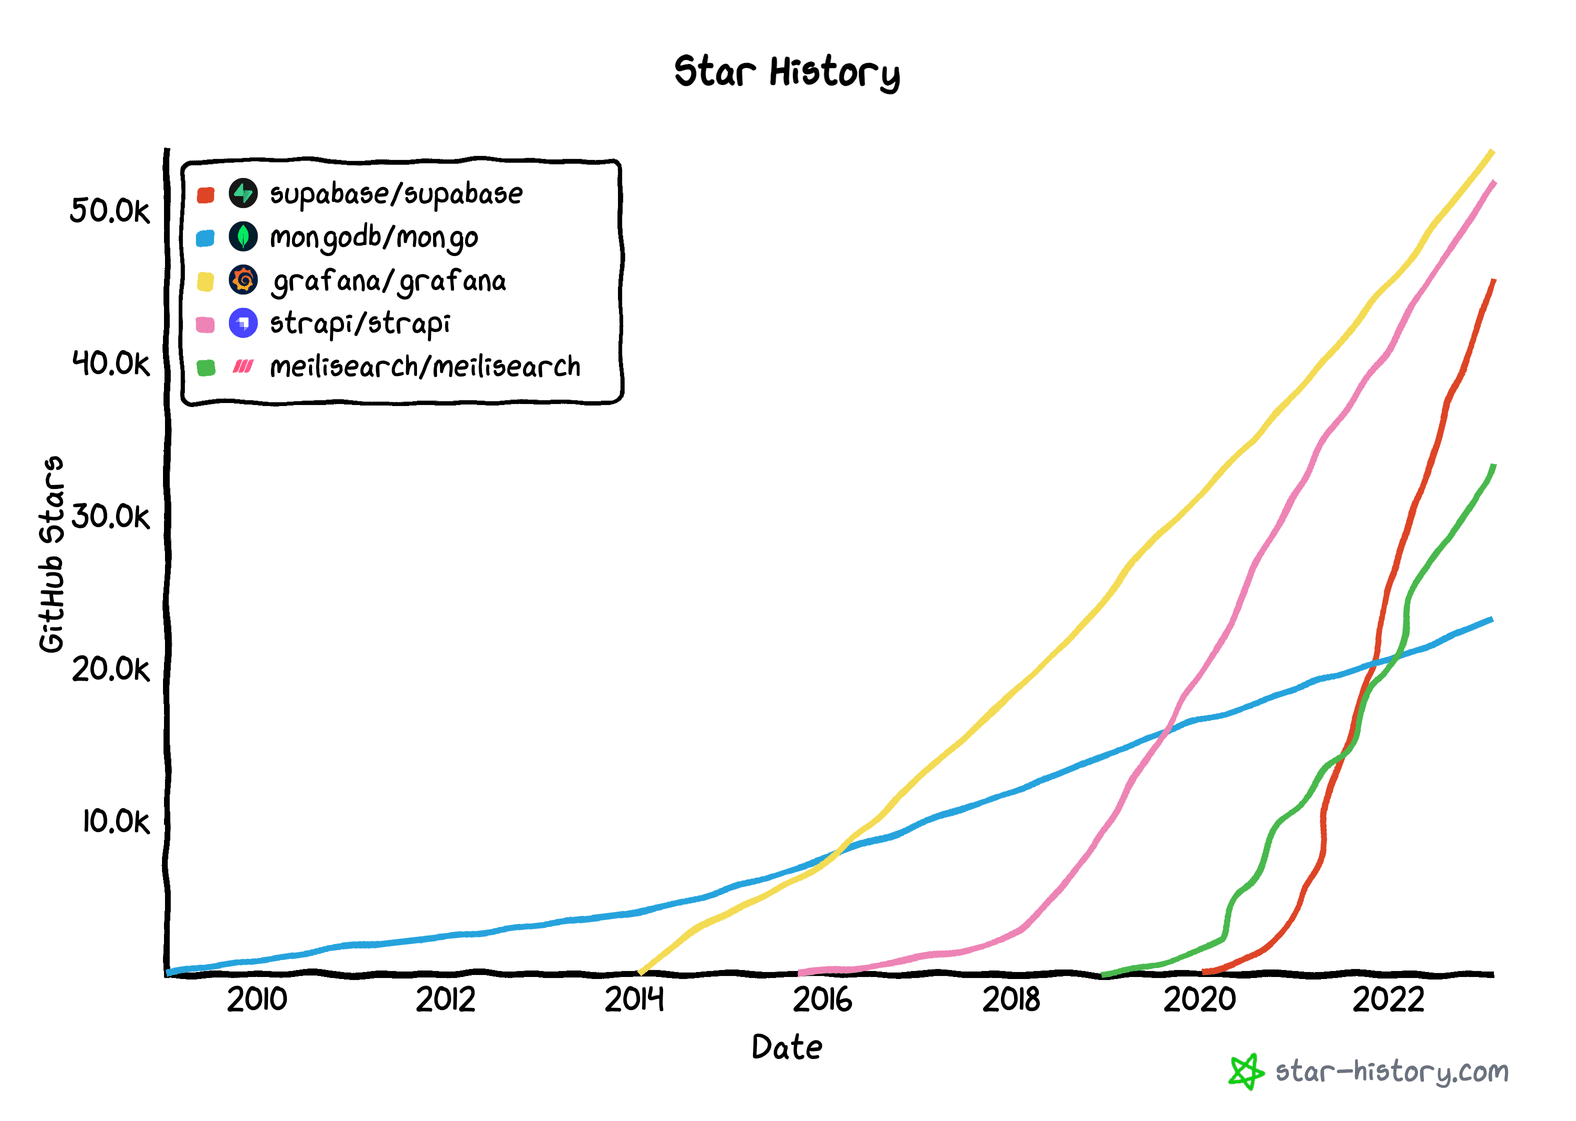 A chart with the positive star history trend on GitHub for several notable COSS projects.